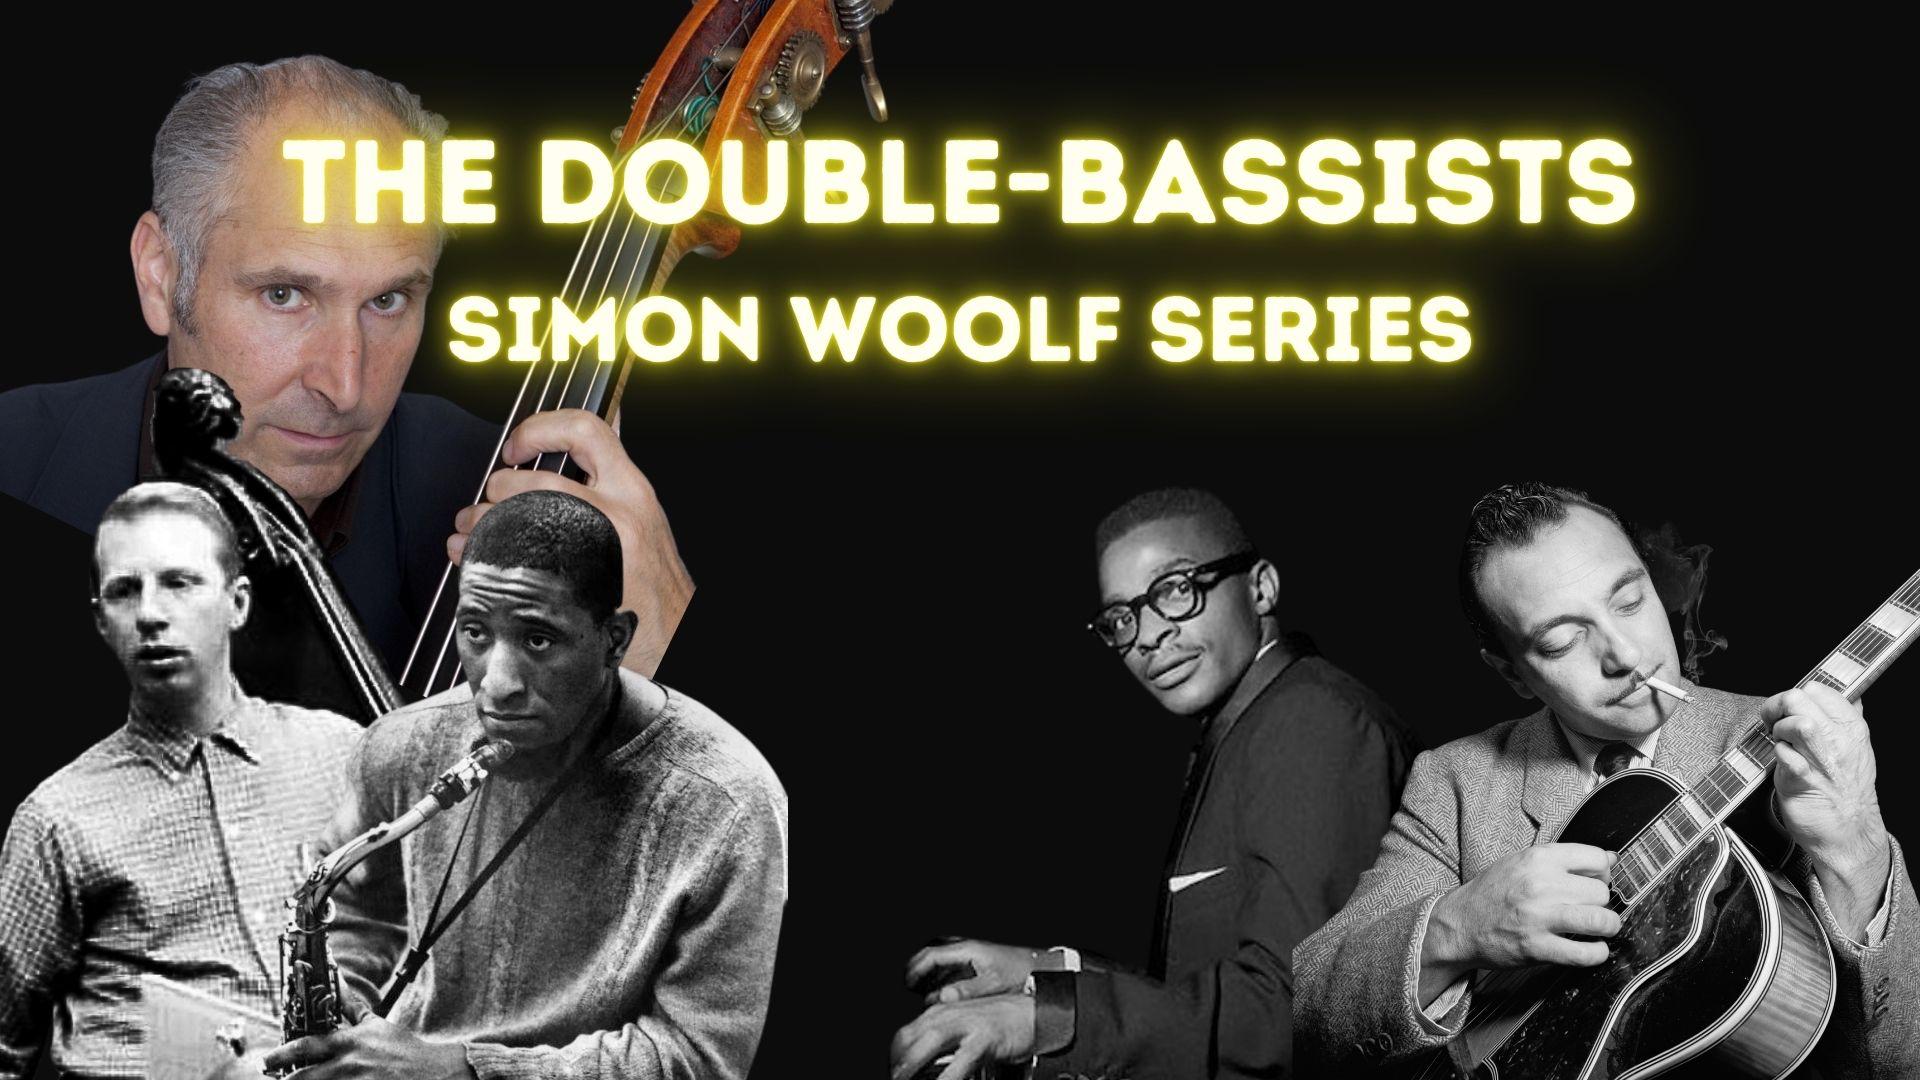 Simon Woolf Jazz Series: The Great Double-bassists ~ Live Broadcast